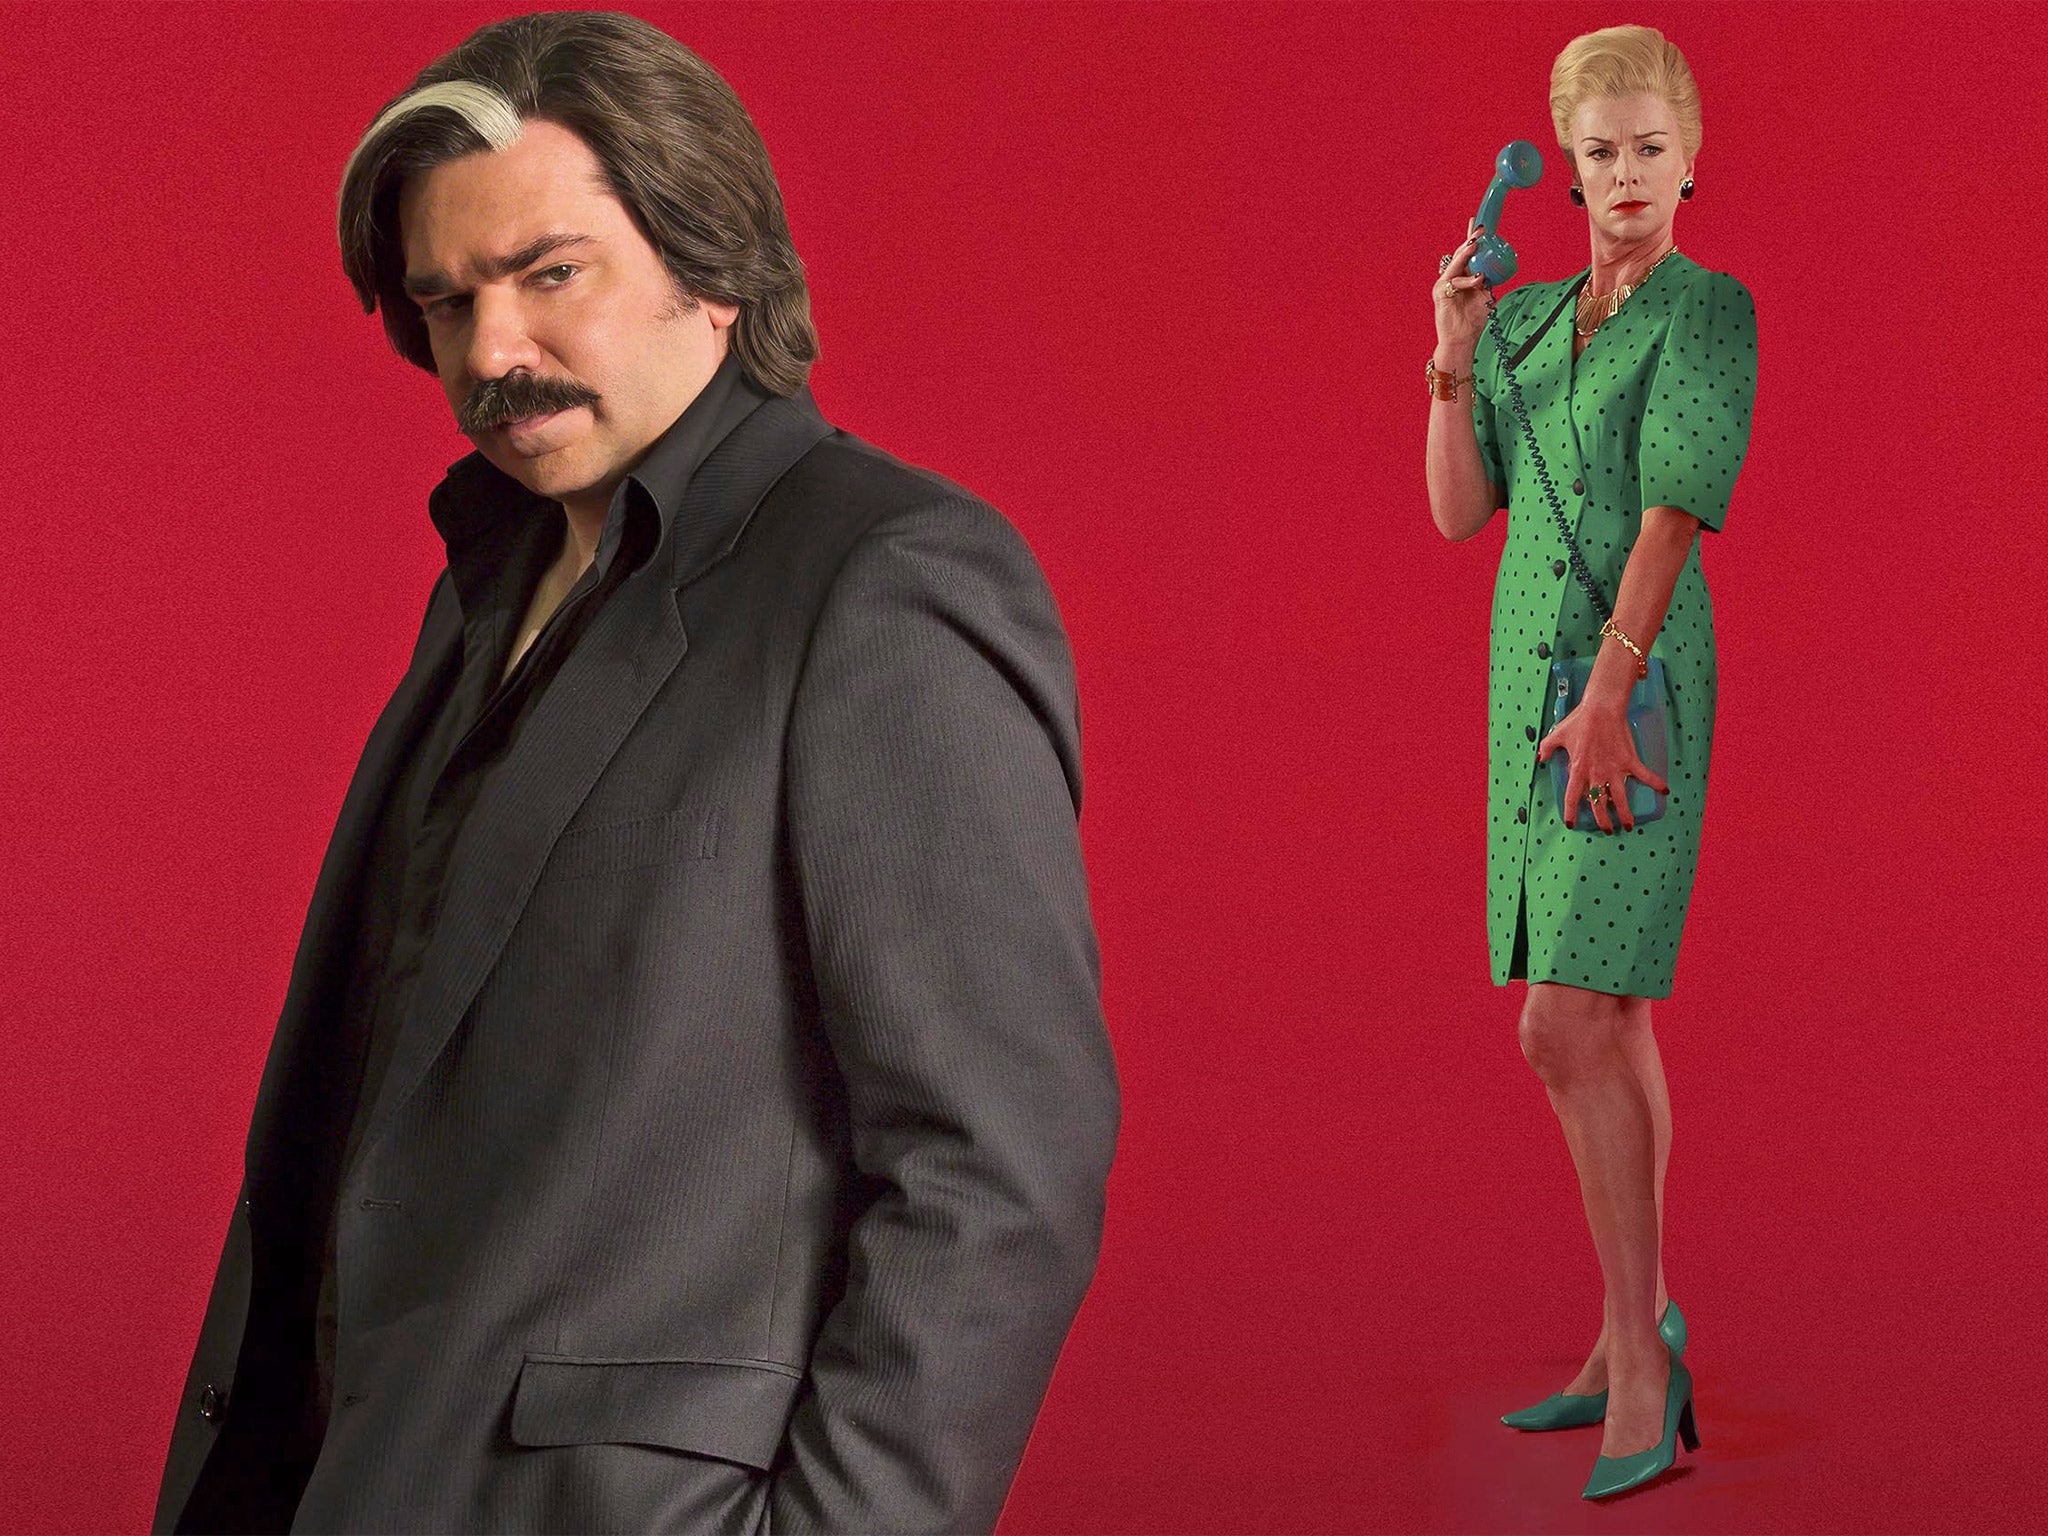 Matt Berry Interview Jon Hamm Joins The Comedian For The Latest Images, Photos, Reviews